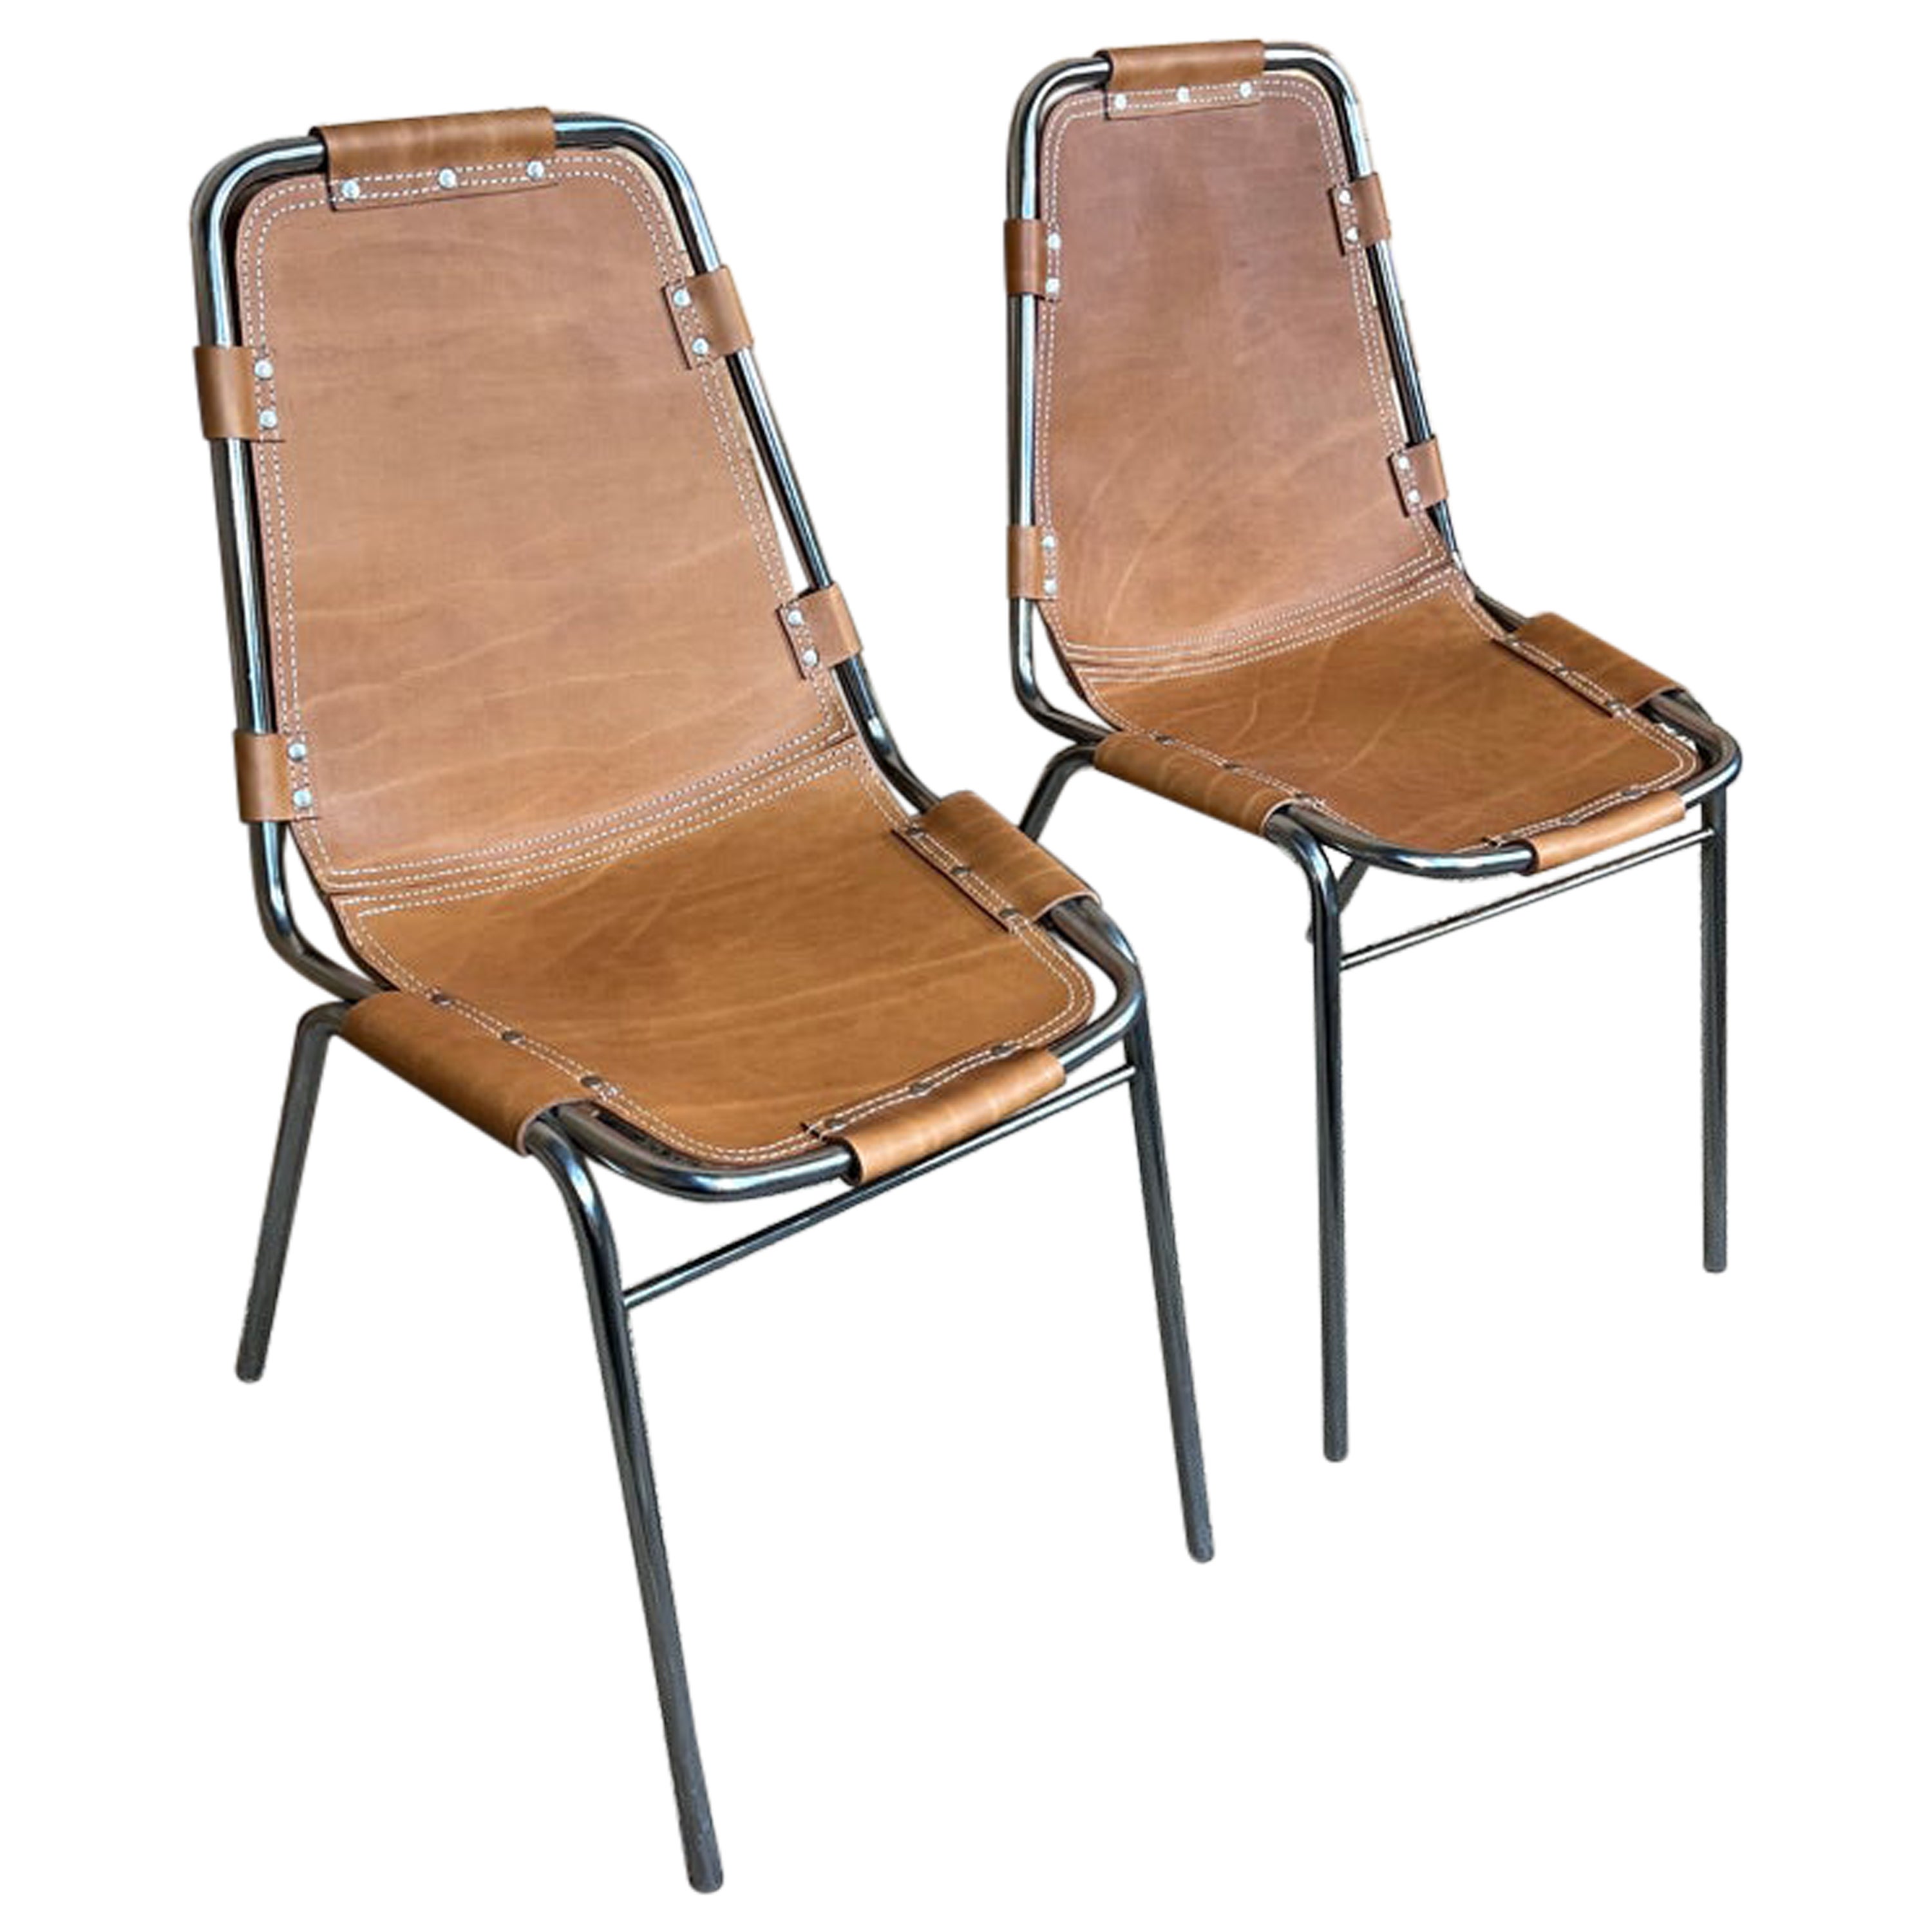 Selected by Charlotte Perriand for Les Arcs Ski Resort, Leather Dining Chairs